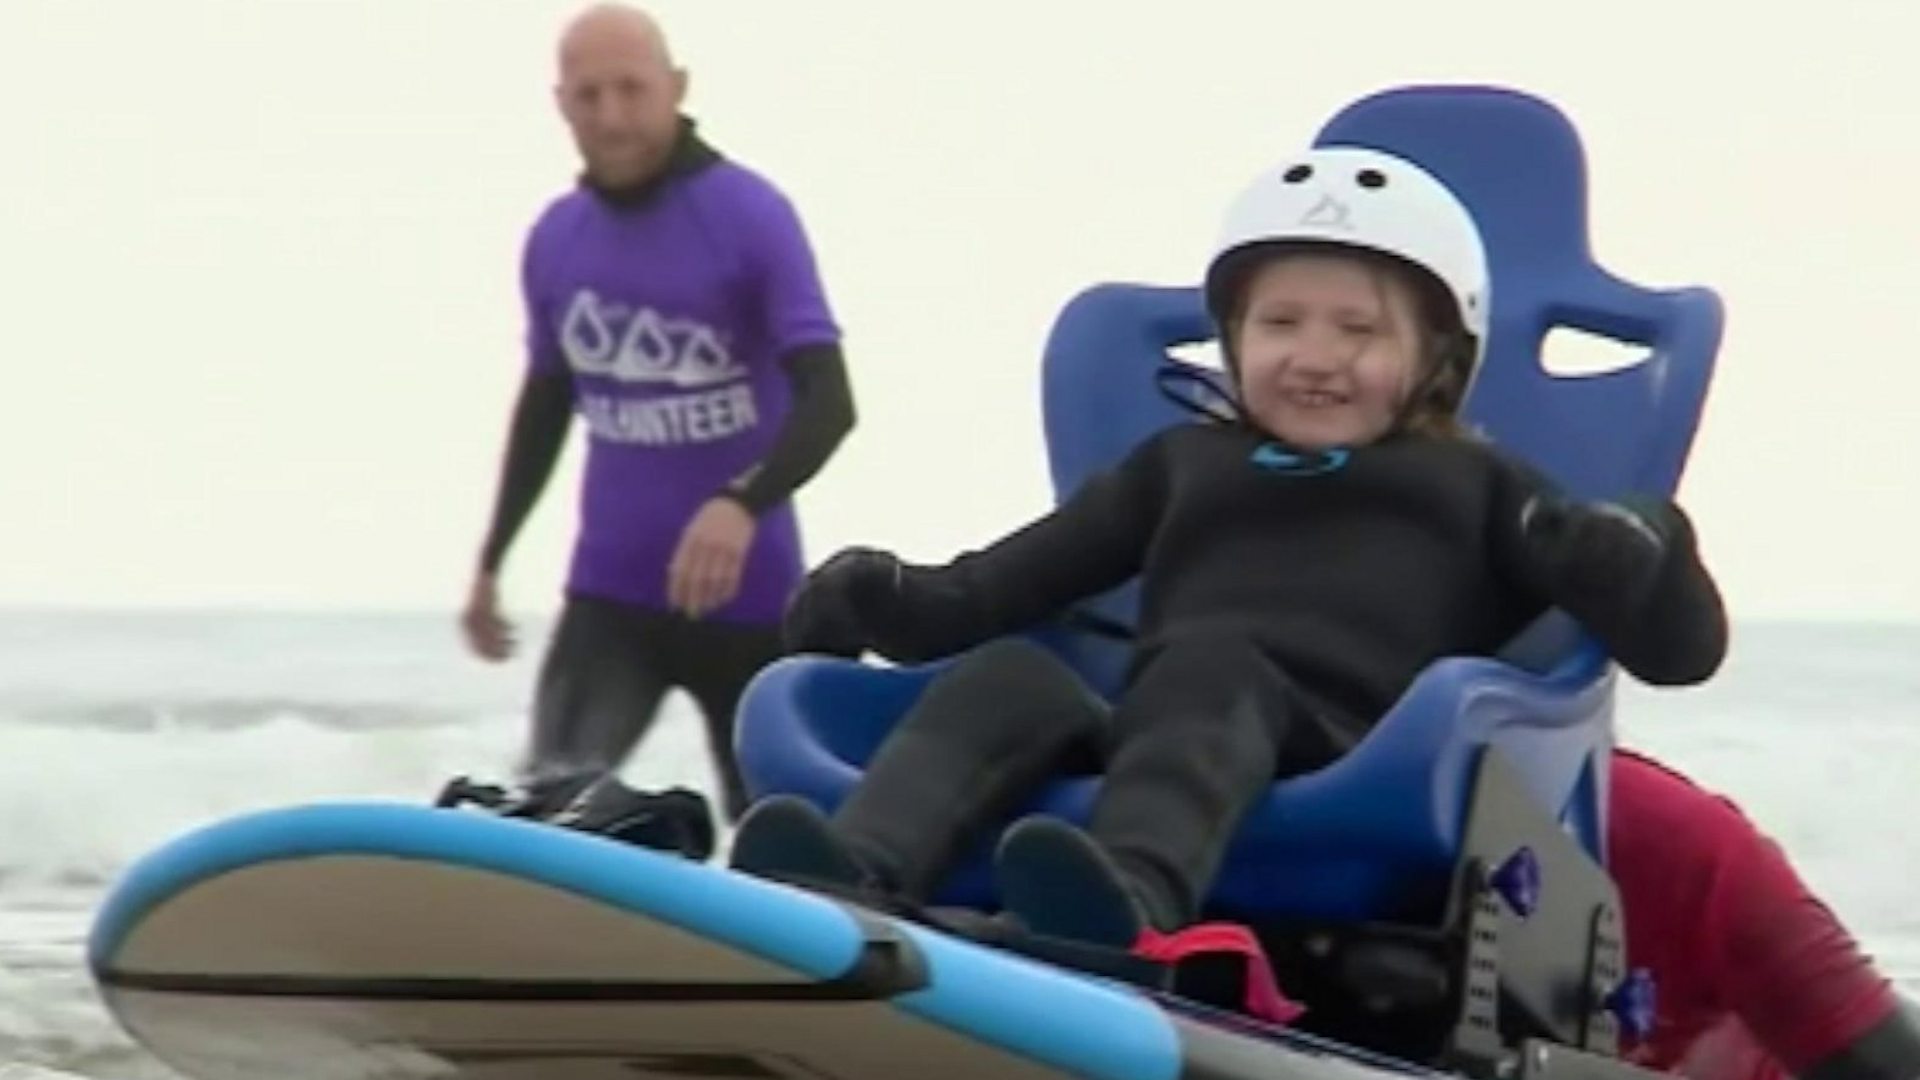 New prosthetic arm surfing aid tested in Bristol - BBC News